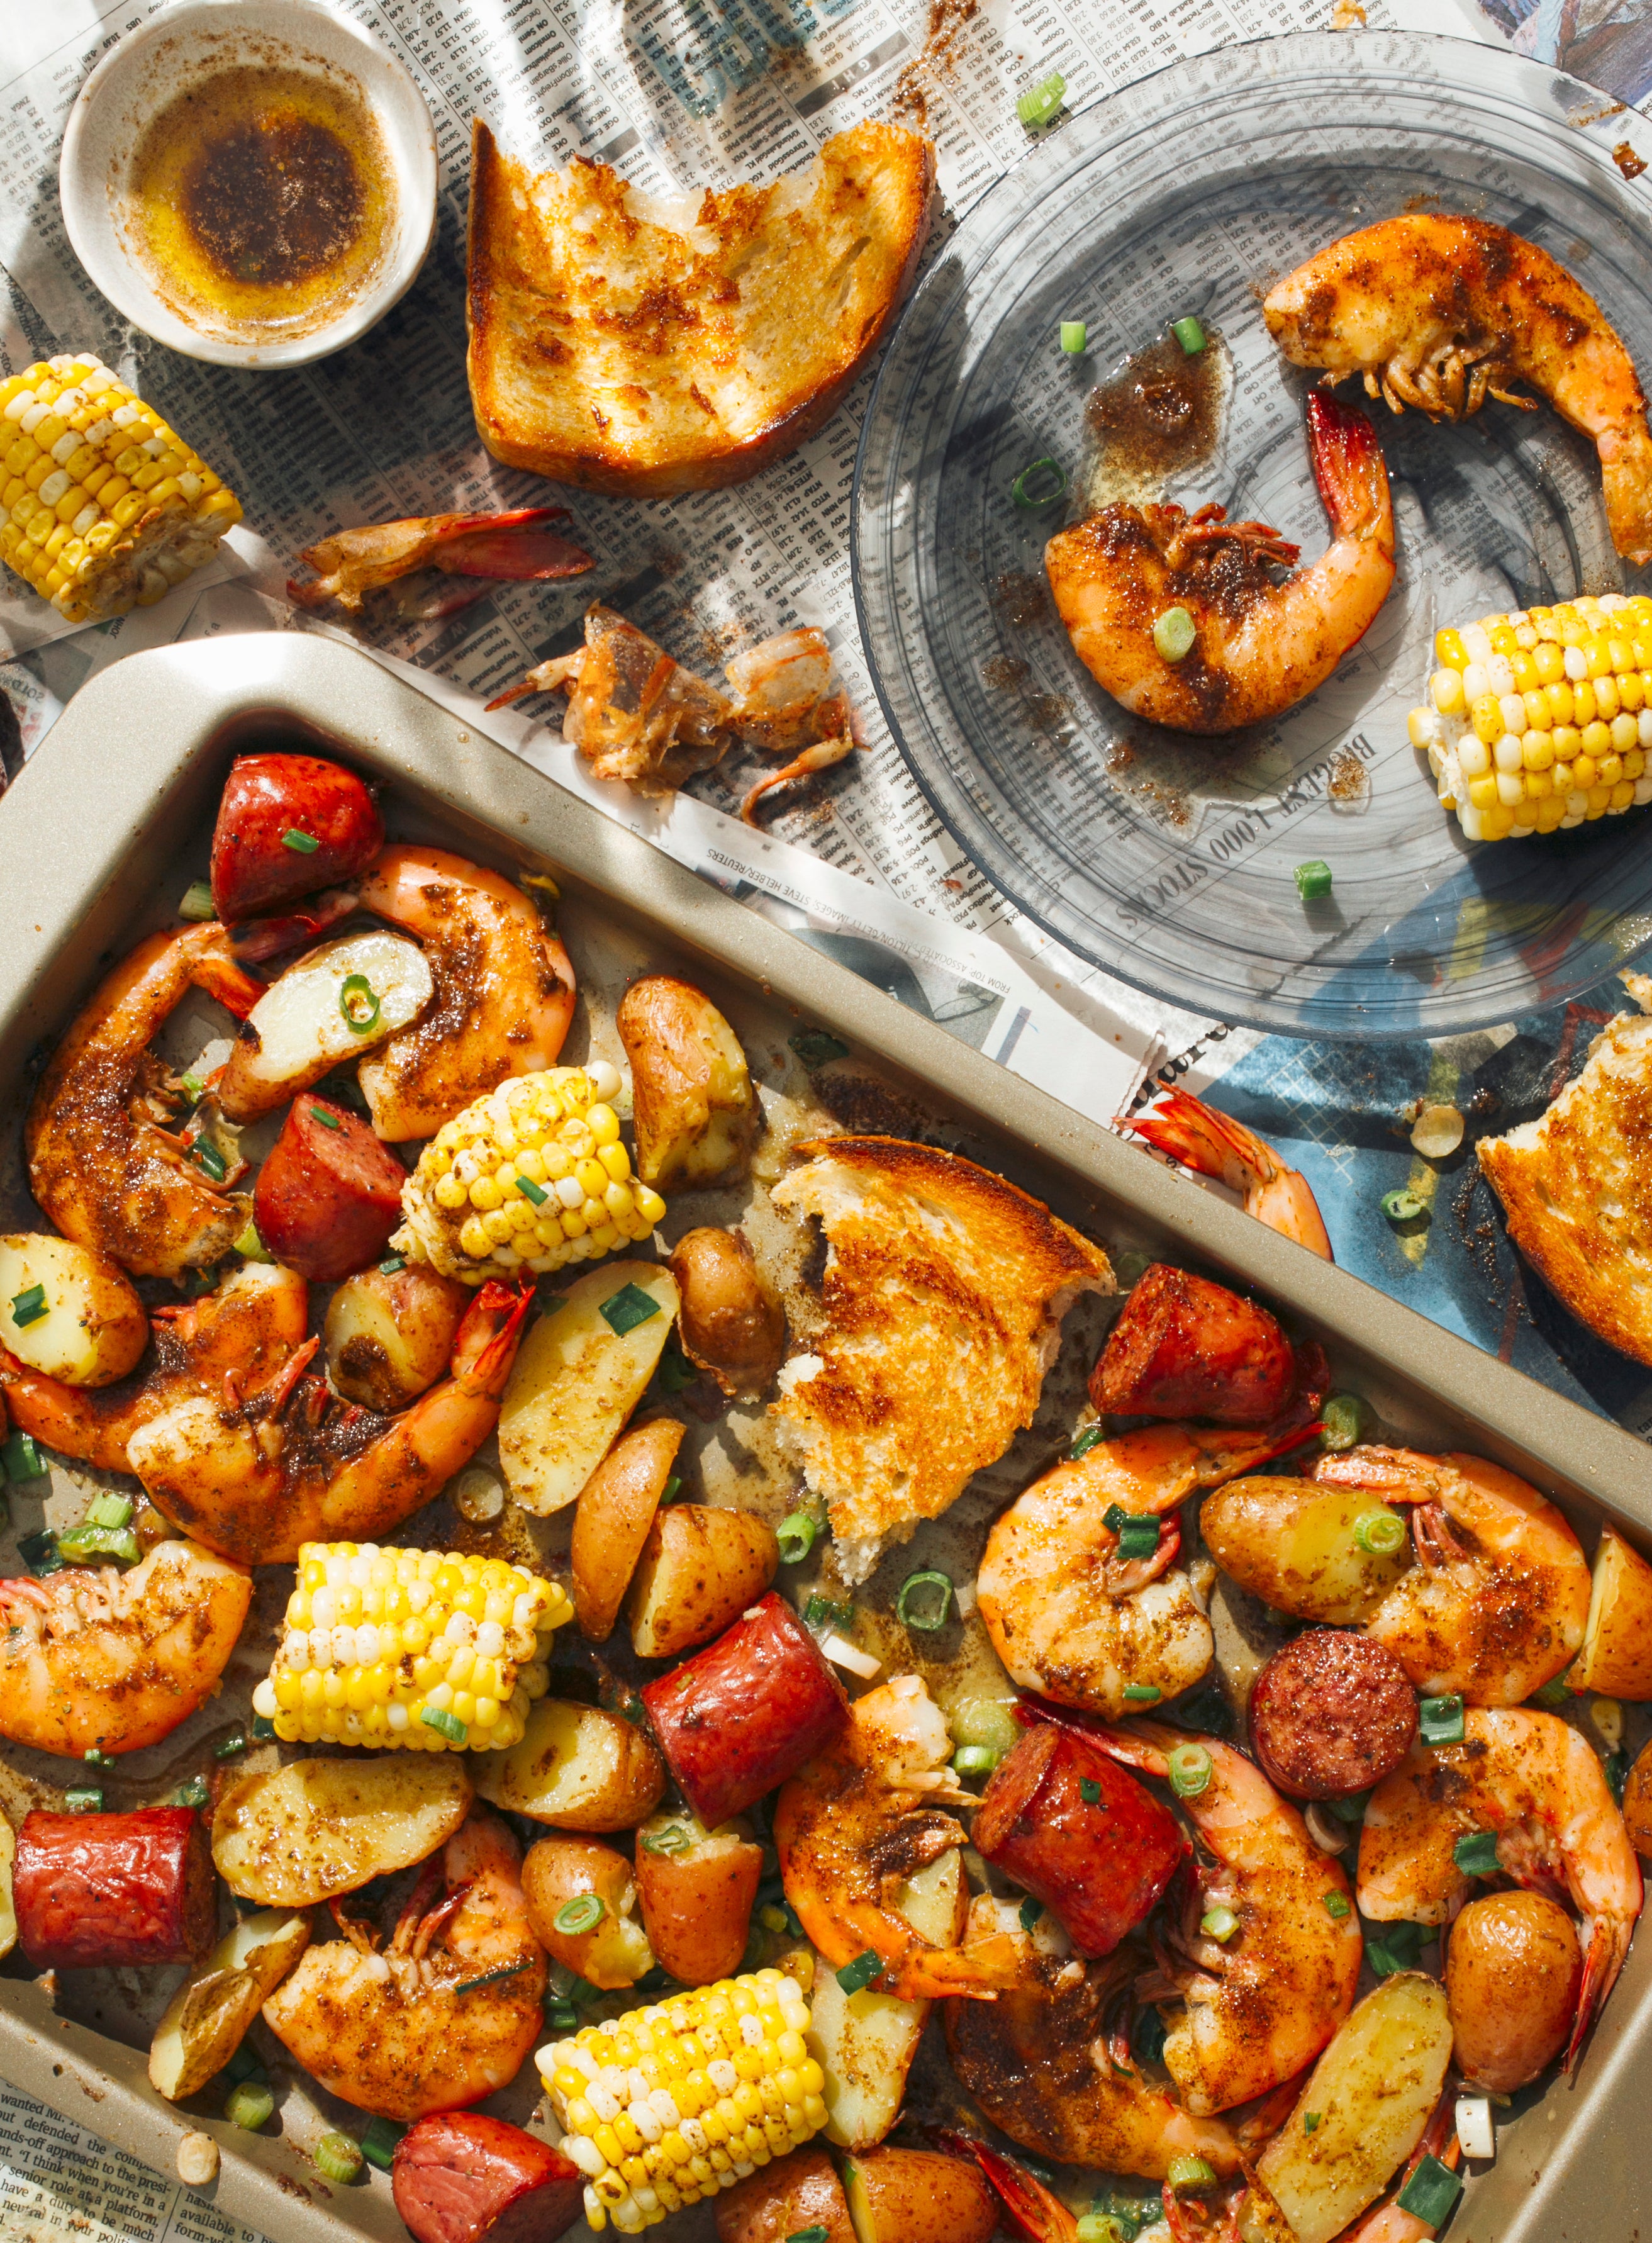 Sheet Pan Shrimp “Boil” with Buttery Spiced Toast